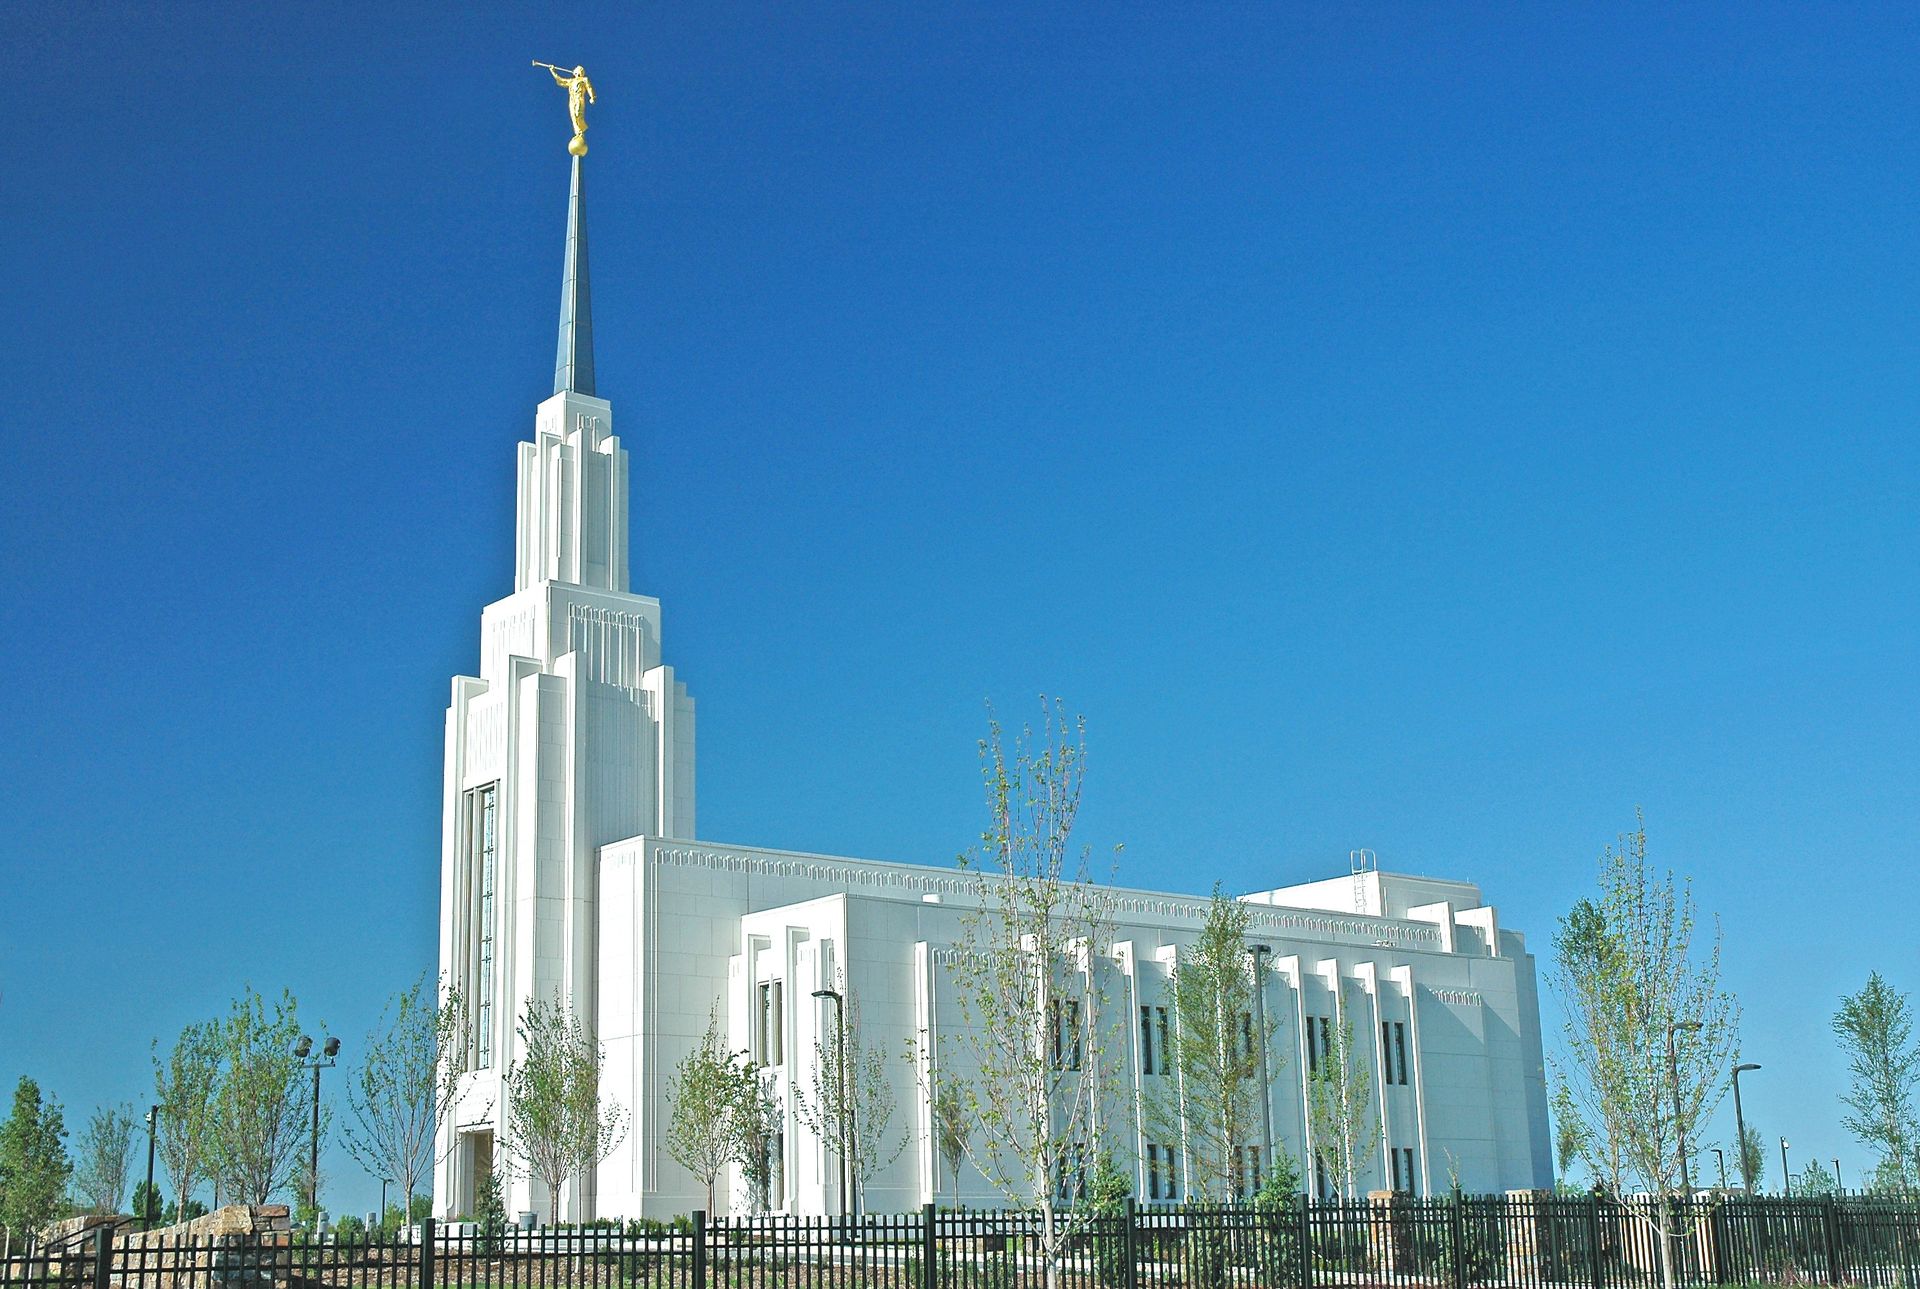 The Twin Falls Idaho Temple north side, with the windows, spire, and scenery.